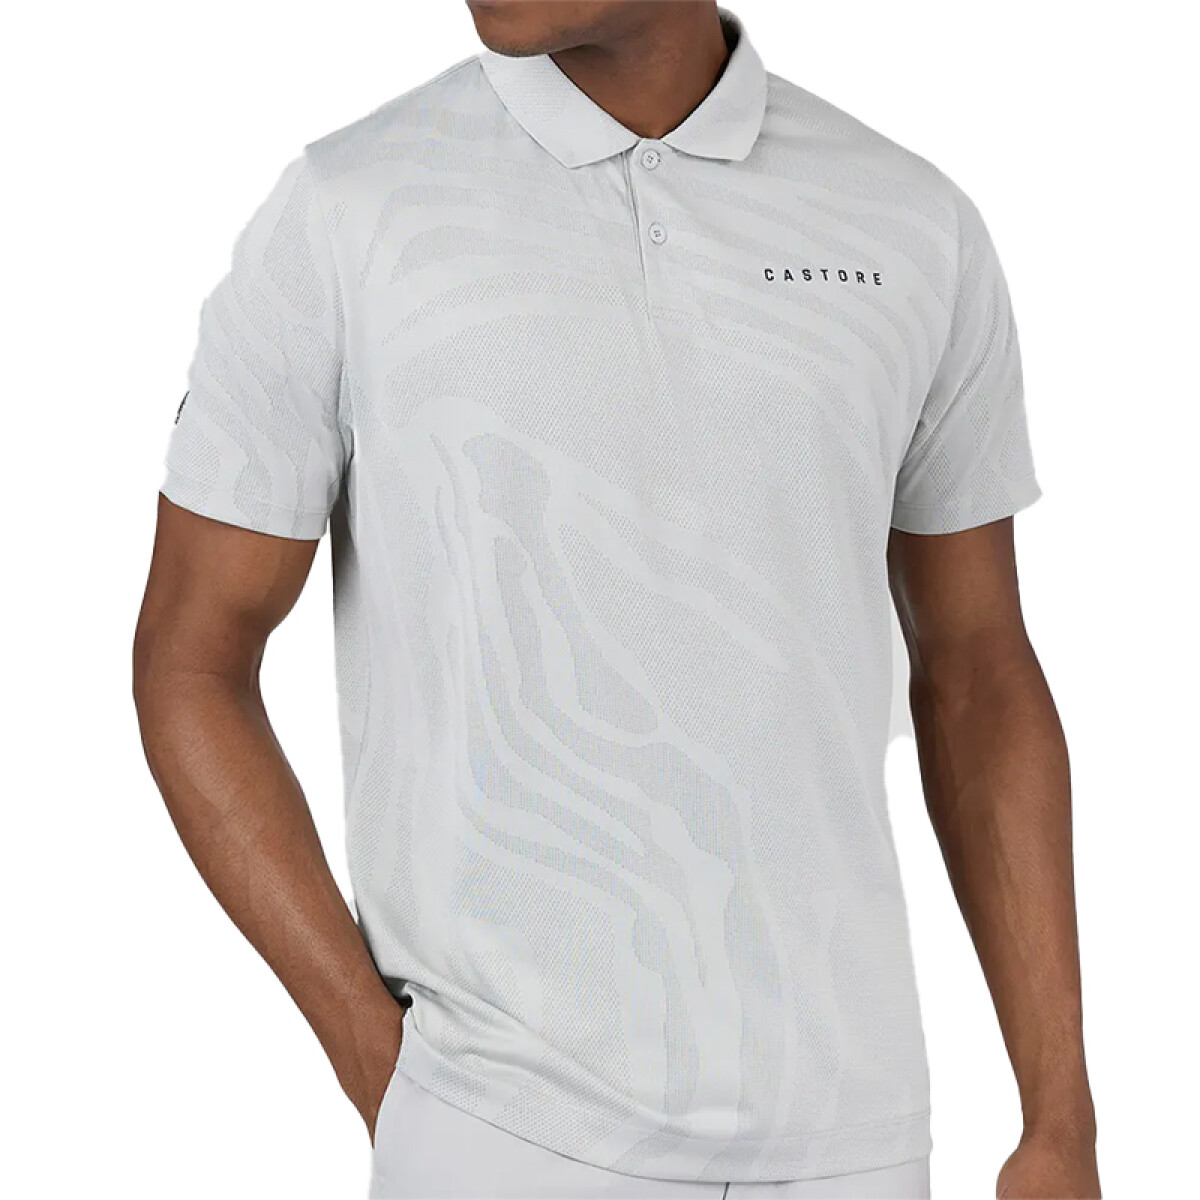 Remera Castore Polo Engineered Kint - Gris 